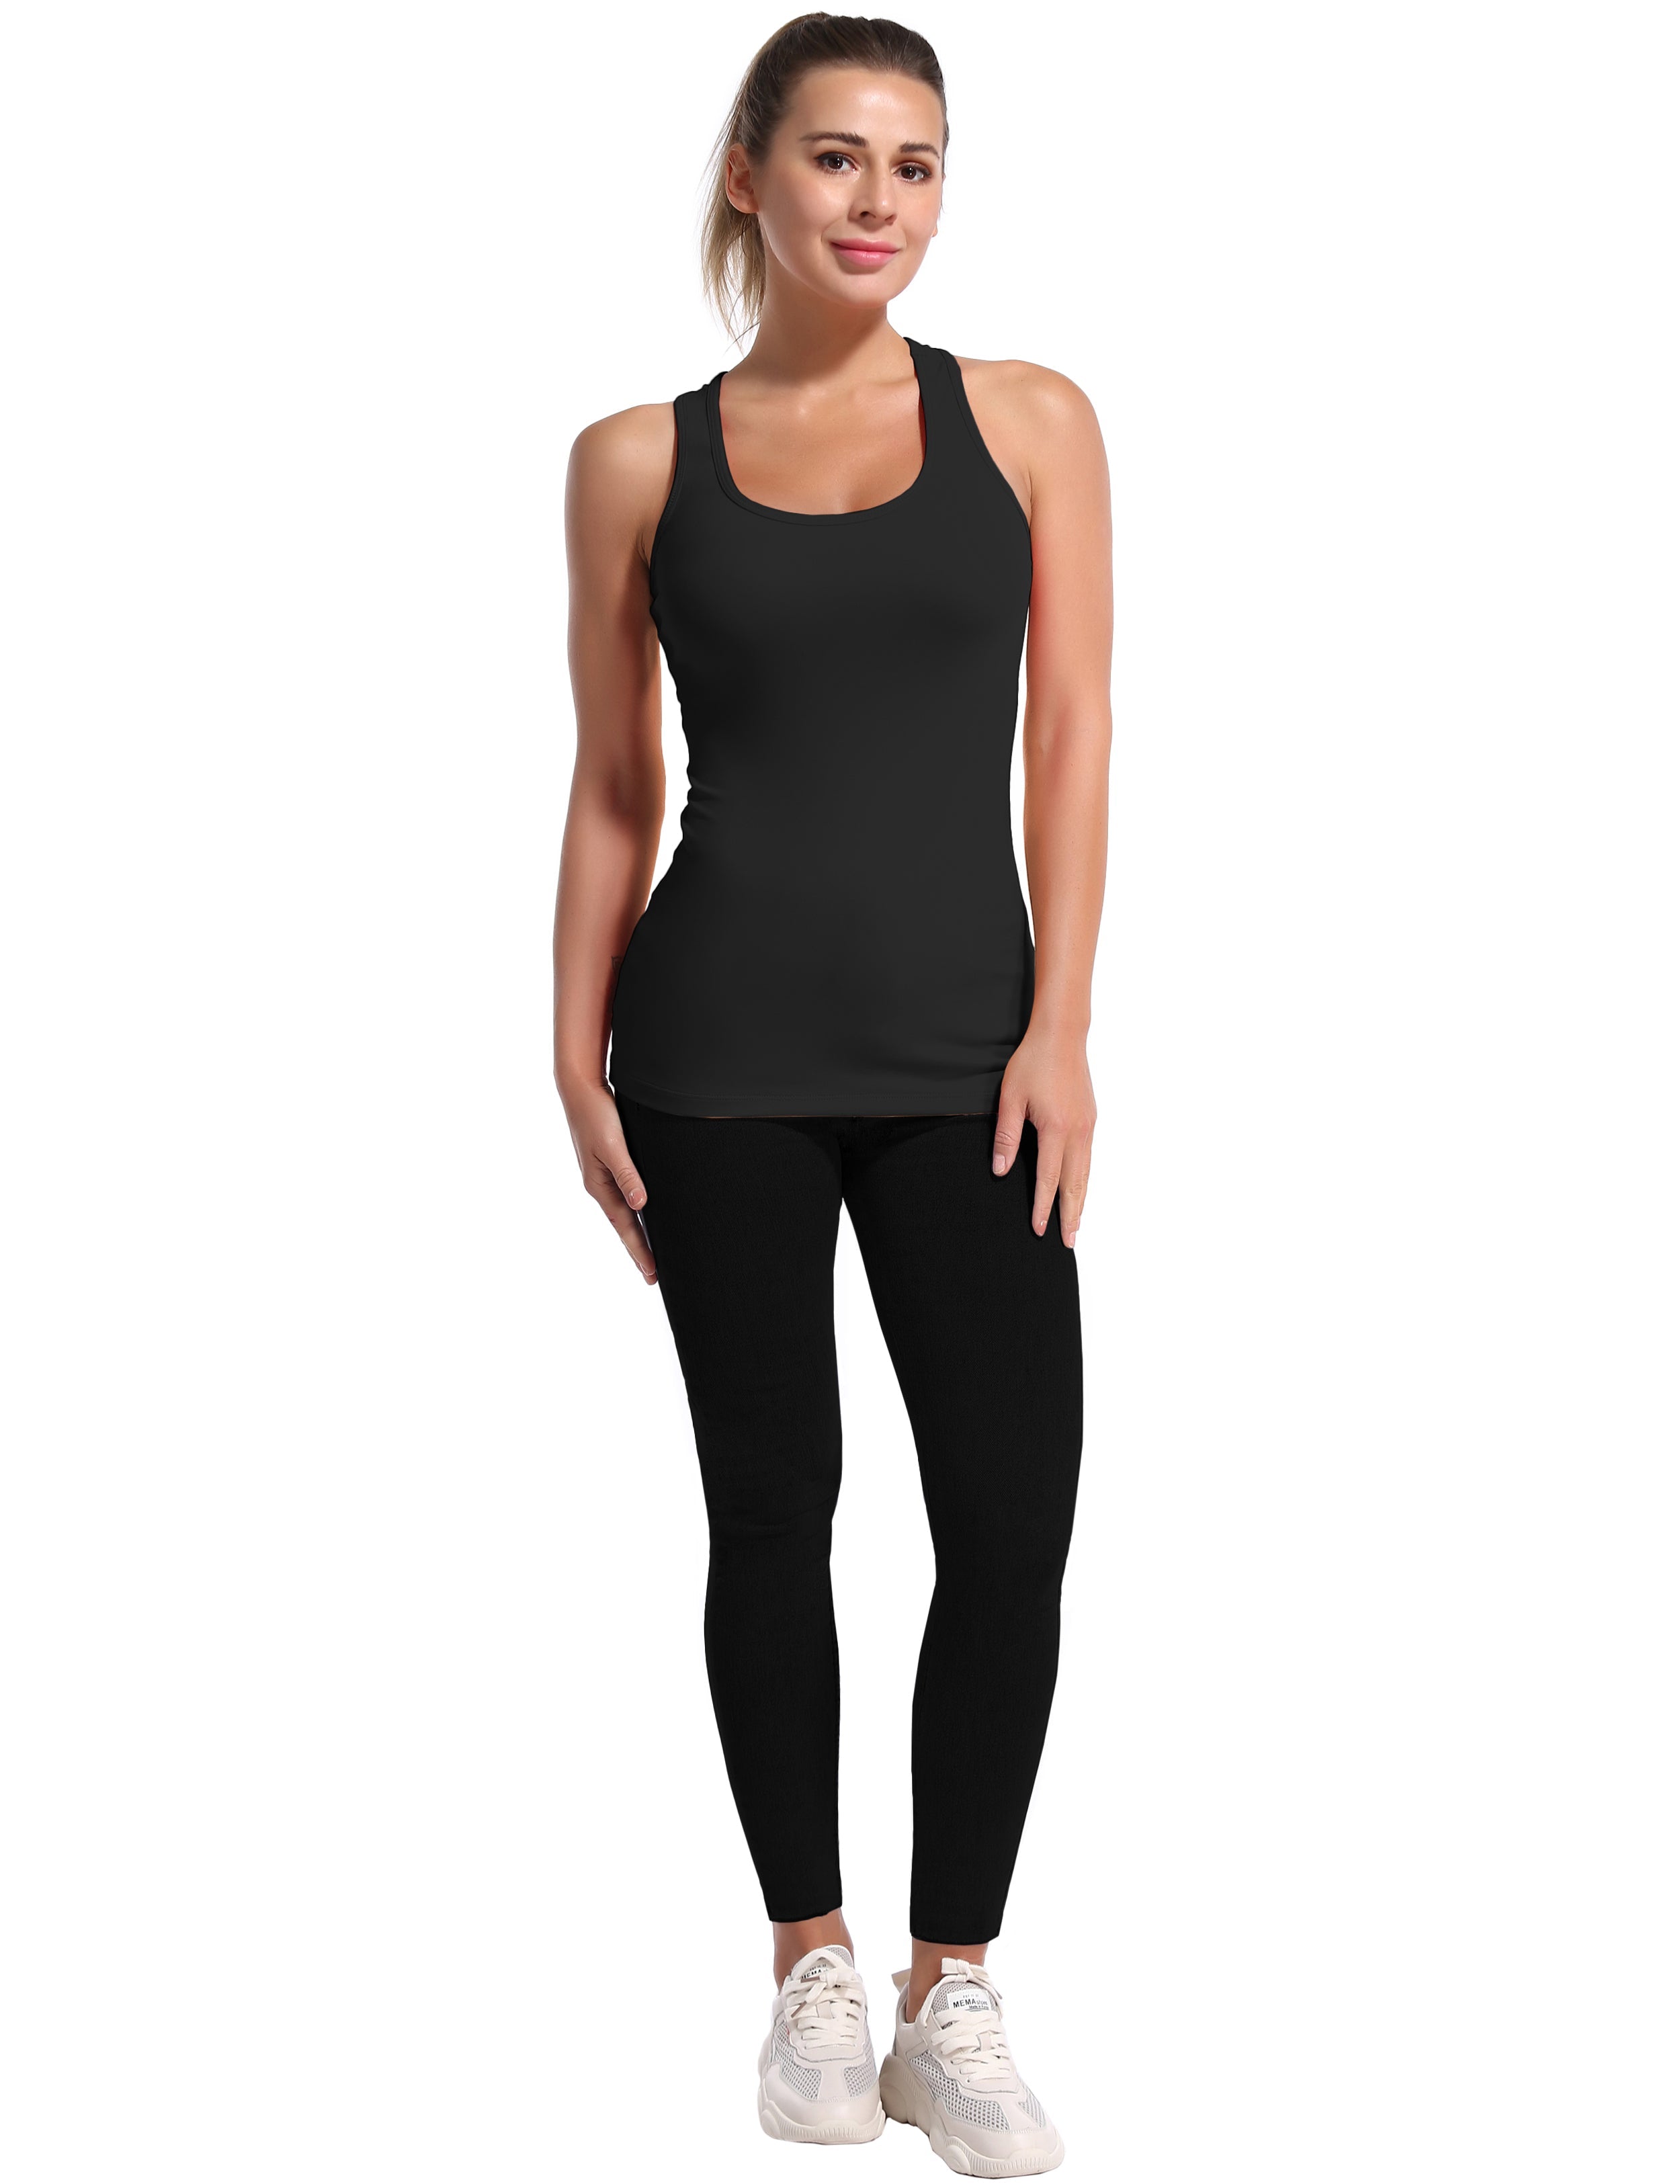 Racerback Athletic Tank Tops black 92%Nylon/8%Spandex(Cotton Soft) Designed for Jogging Tight Fit So buttery soft, it feels weightless Sweat-wicking Four-way stretch Breathable Contours your body Sits below the waistband for moderate, everyday coverage